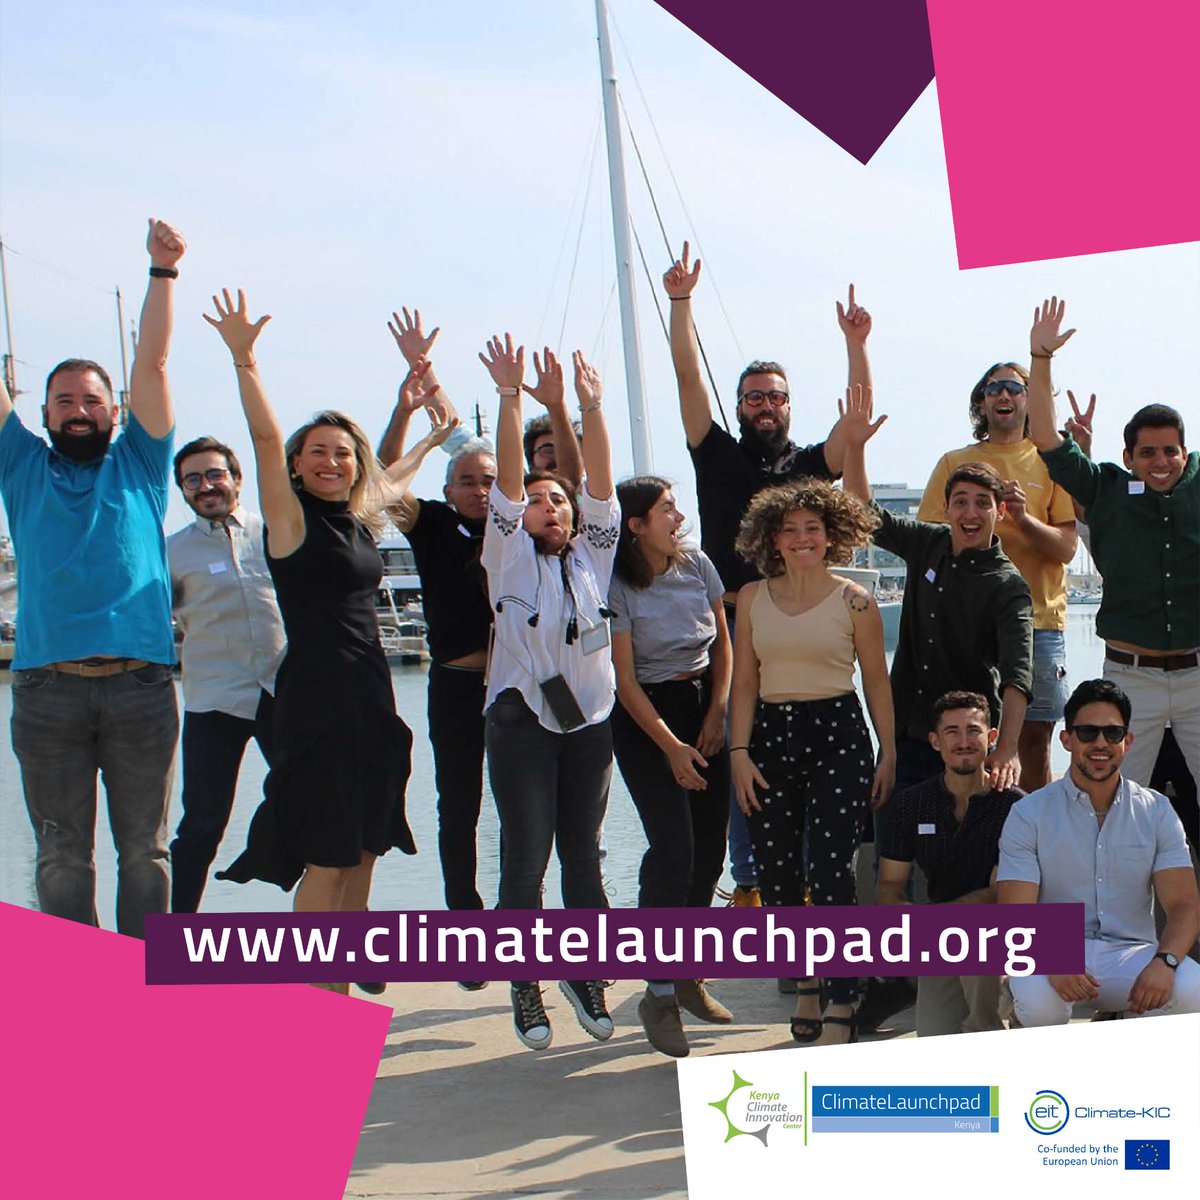 🌱 Excited to make a green impact? Join the #ClimateLaunchpad competition and turn your #cleantech #business idea into a reality. We're accepting applications in various areas:
i) Sustainable Mobility 
ii) Circular Economies 
iii) Urban Solutions 
iv) Clean Energy 
v) Food